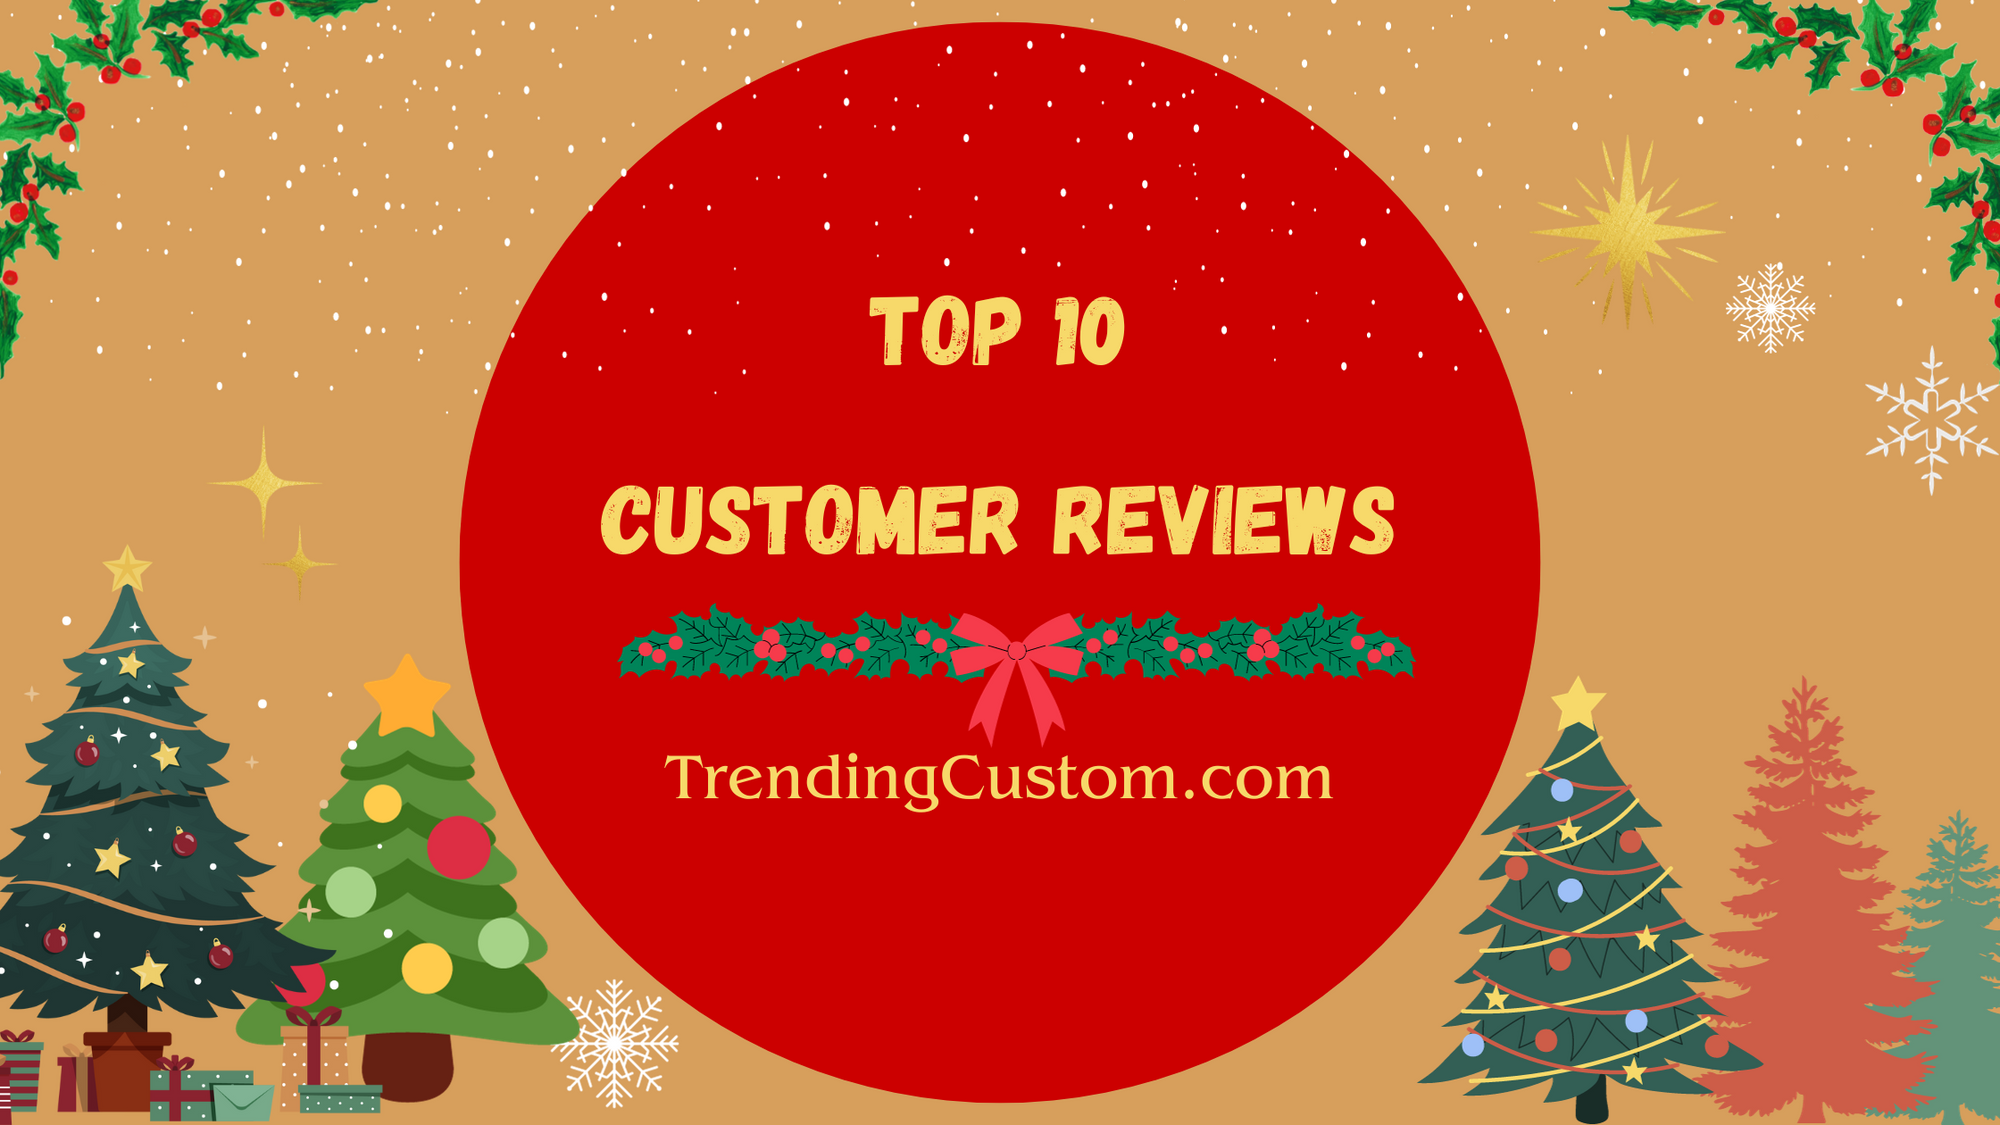 Top 10 Raving Reviews: Our Customers Speak Out! - November 24th